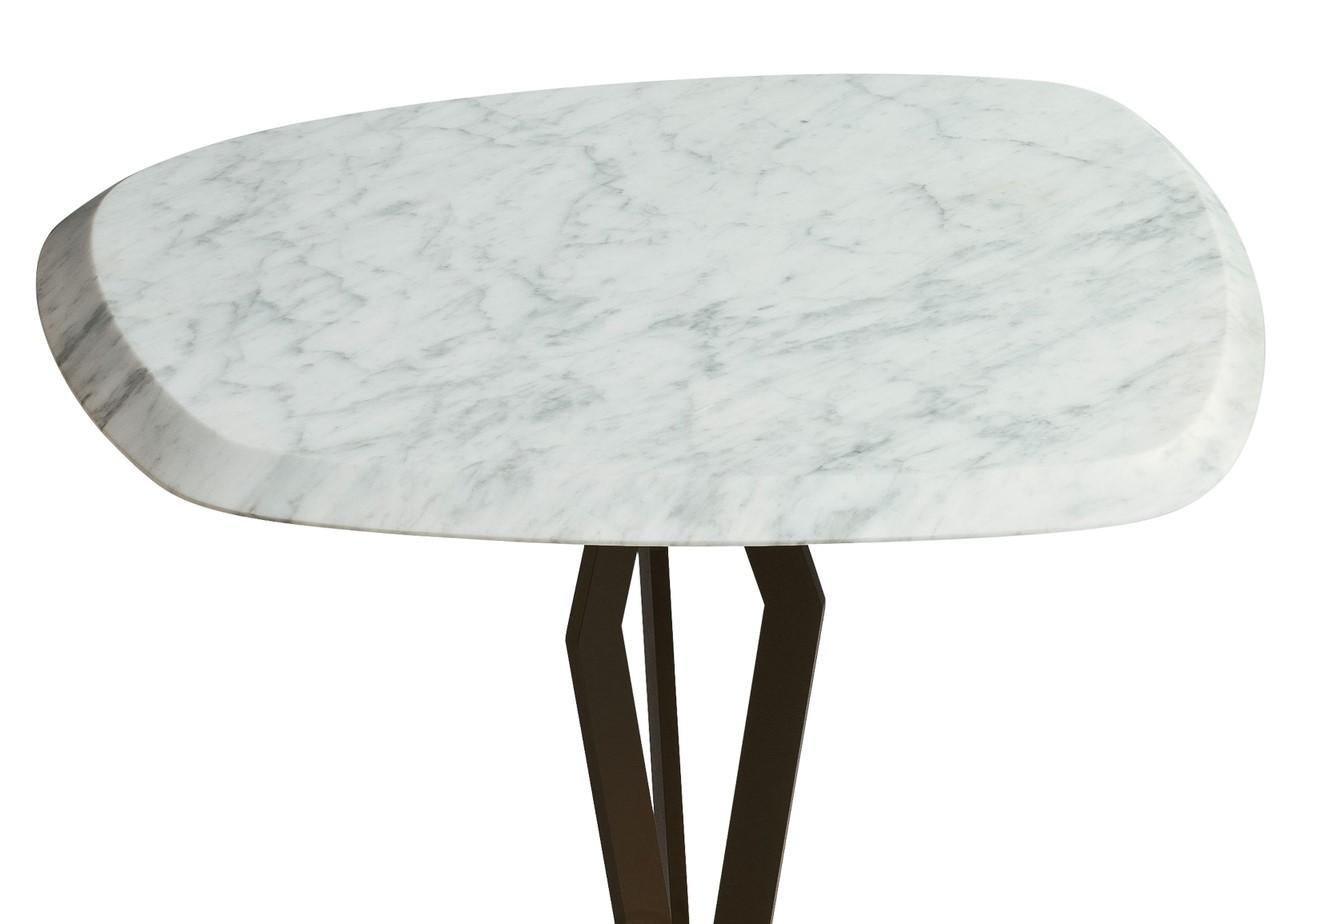 Designed by Paolo Salvadè for MGM, this elegant side table boasts a striking top of Carrara marble, elegantly hand-finished with unique beveled edges. The same precious stone, with its natural decorative veins, makes the square base, both elements